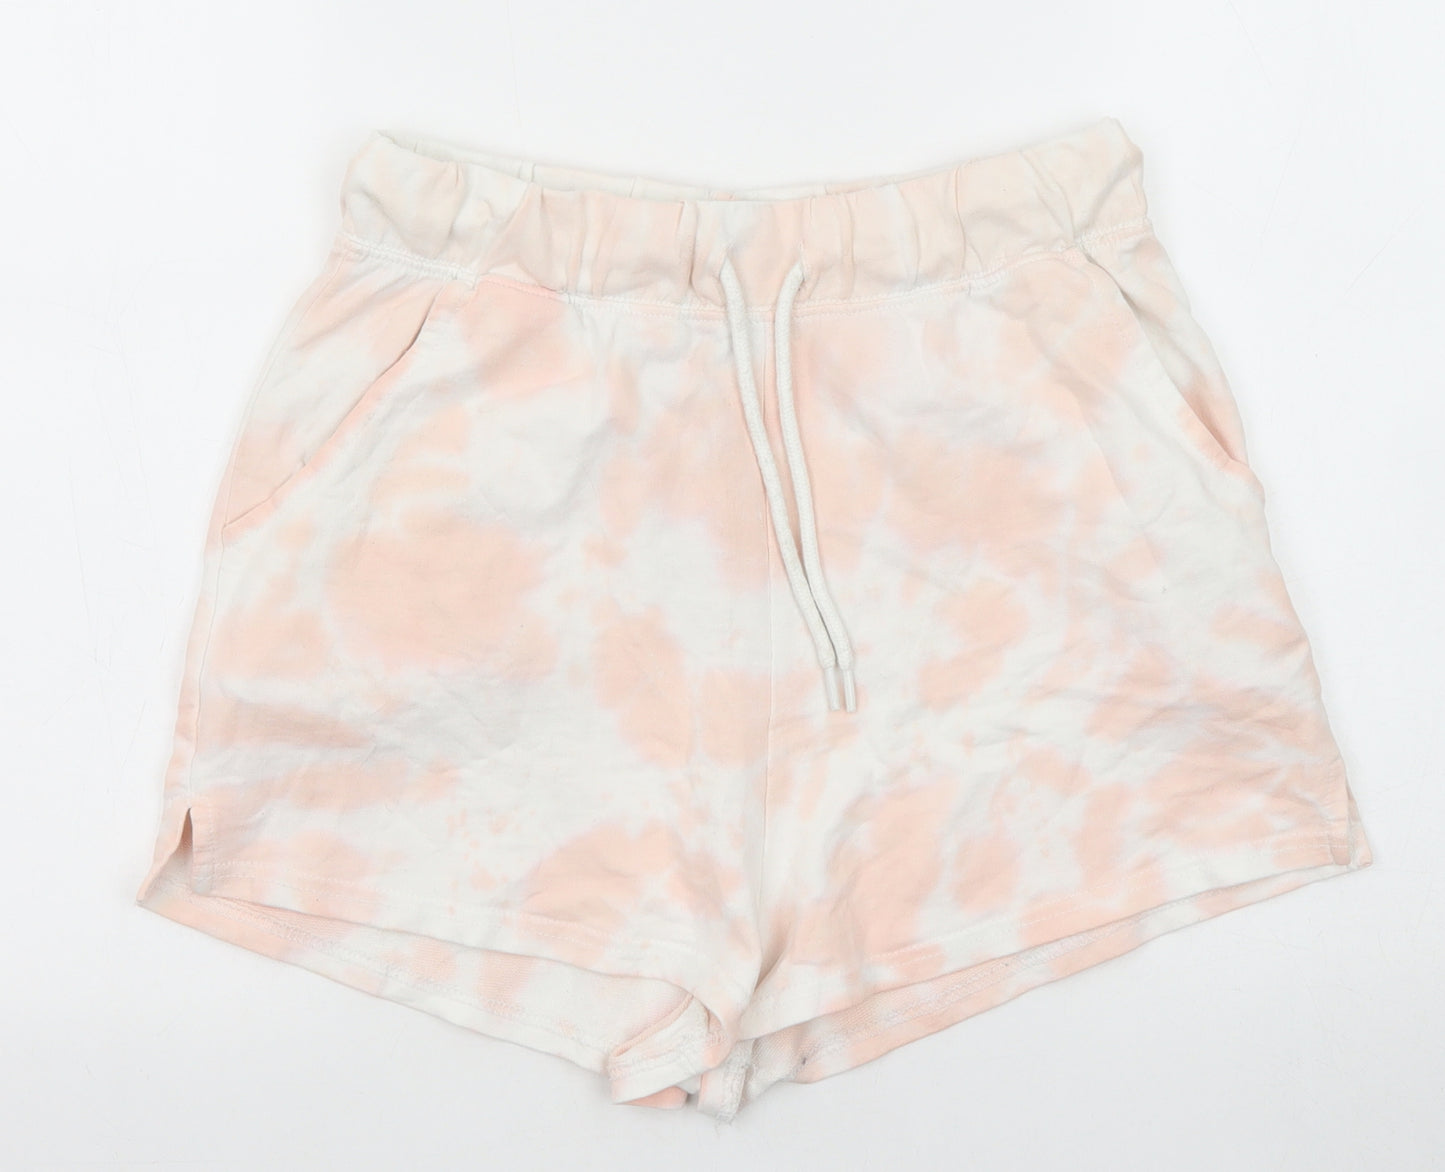 New Look Womens Pink Cotton Sweat Shorts Size S Regular Pull On - Tie Dye